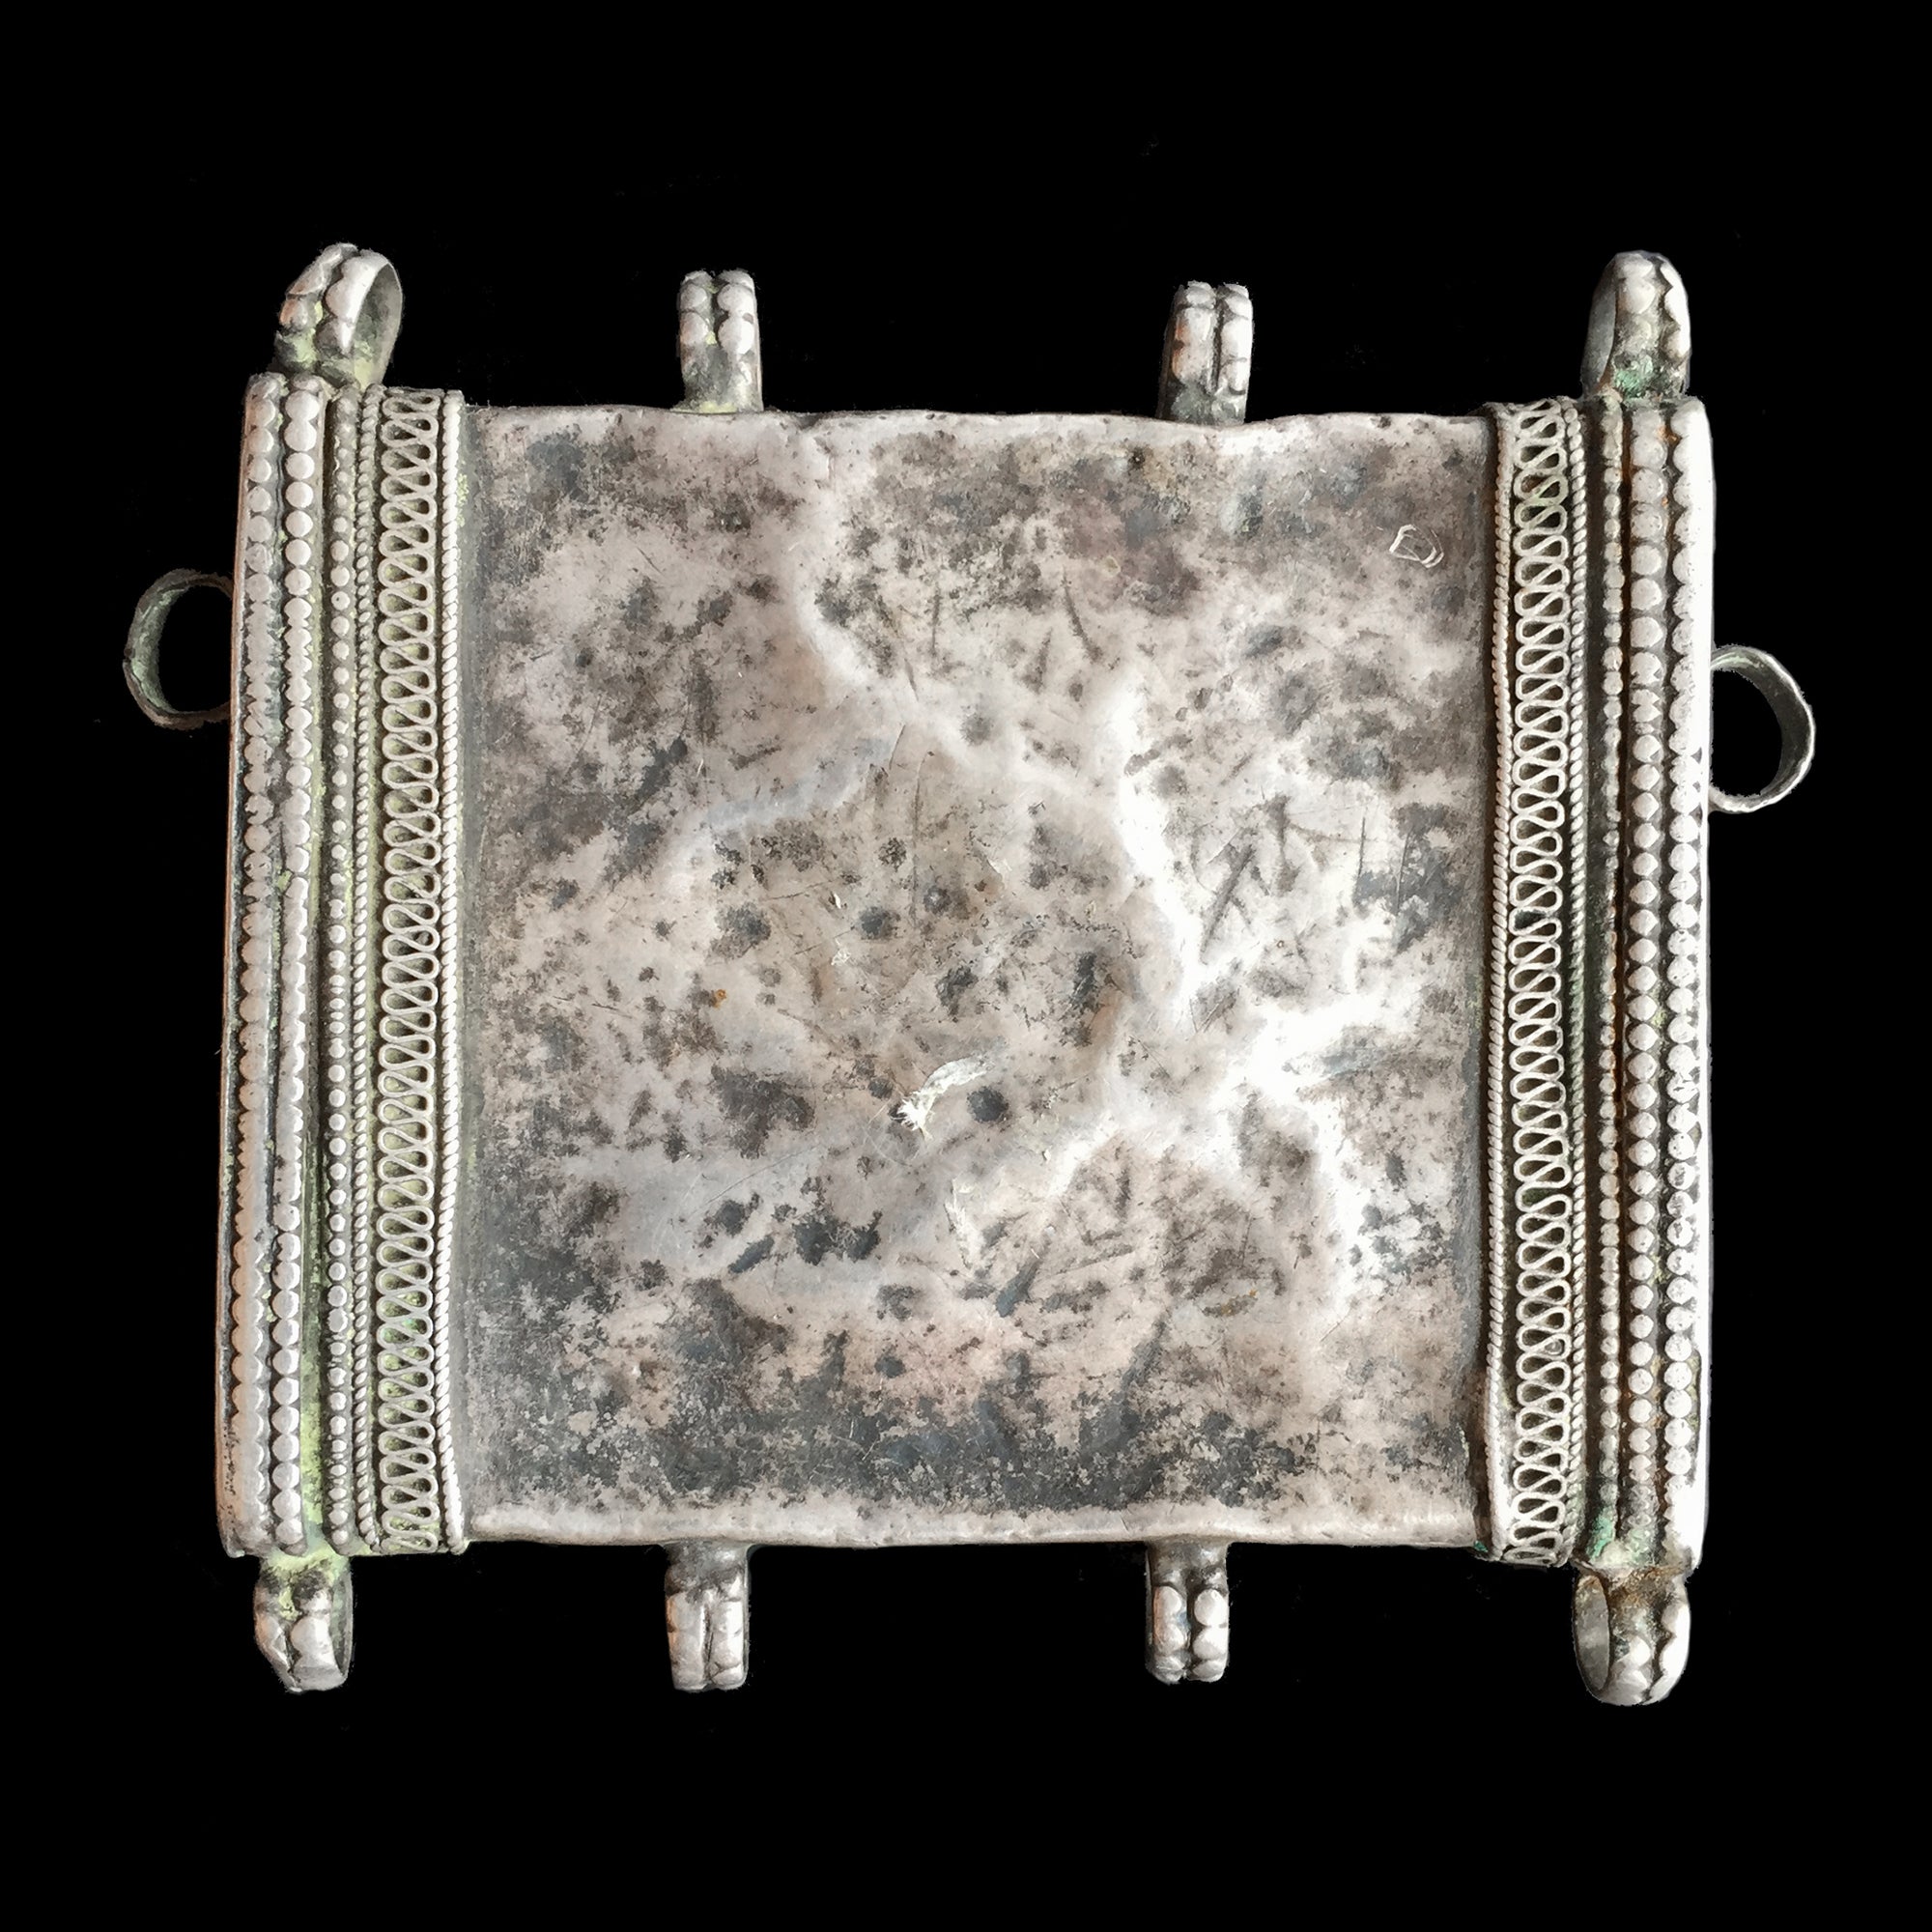 Antique Silver Hirz Amulet from Yemen | Vintage Ethnic Jewellery